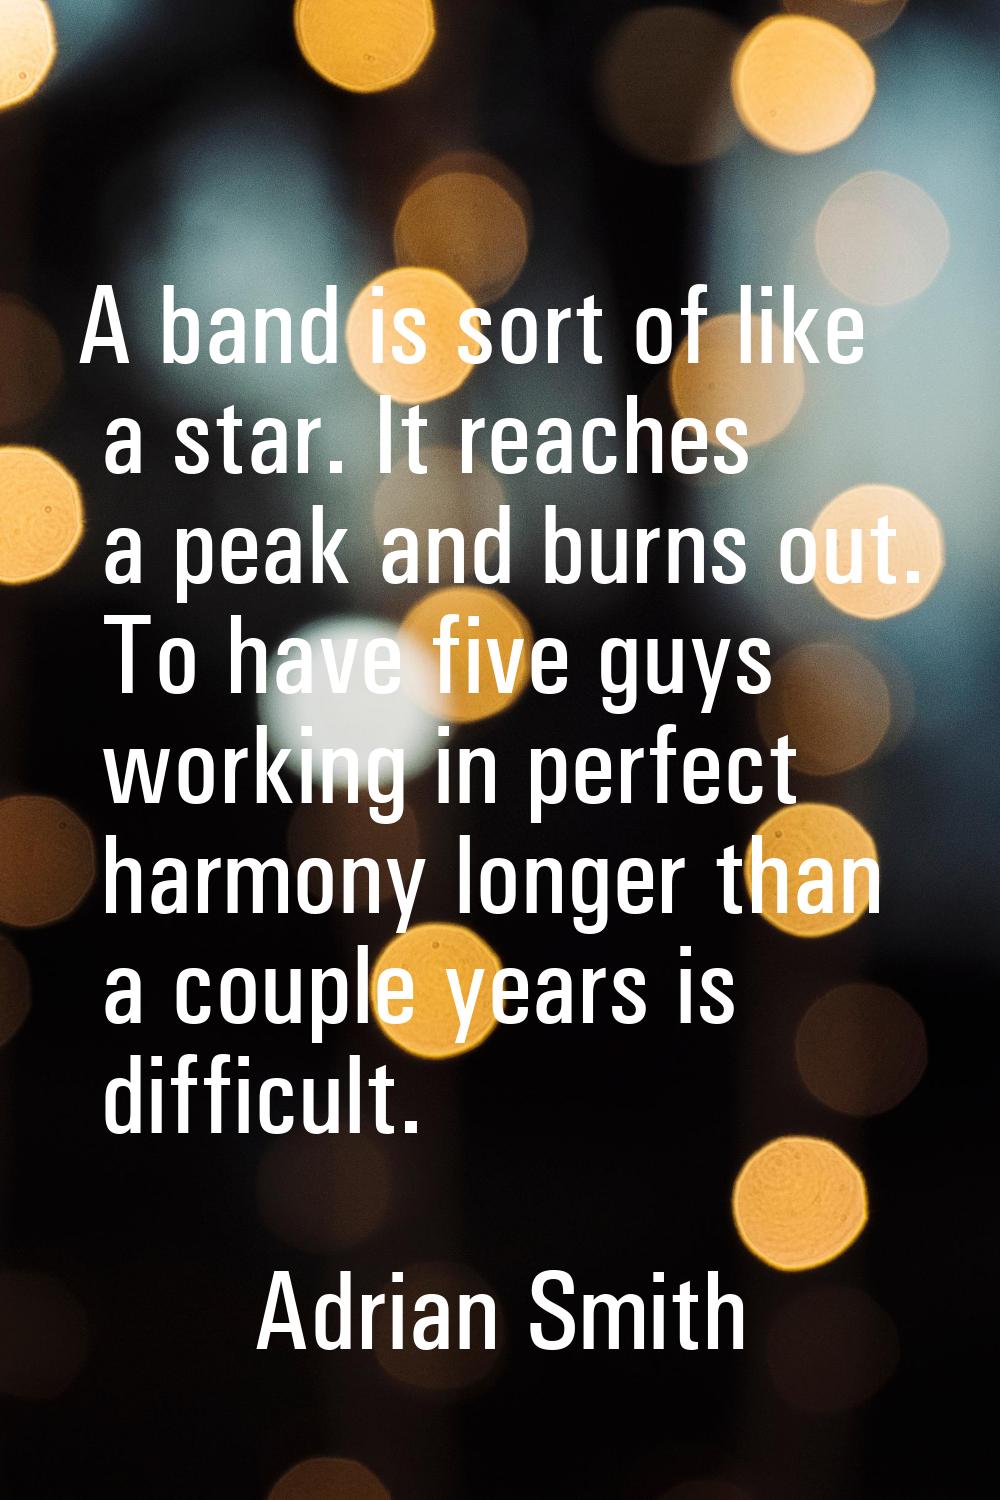 A band is sort of like a star. It reaches a peak and burns out. To have five guys working in perfec